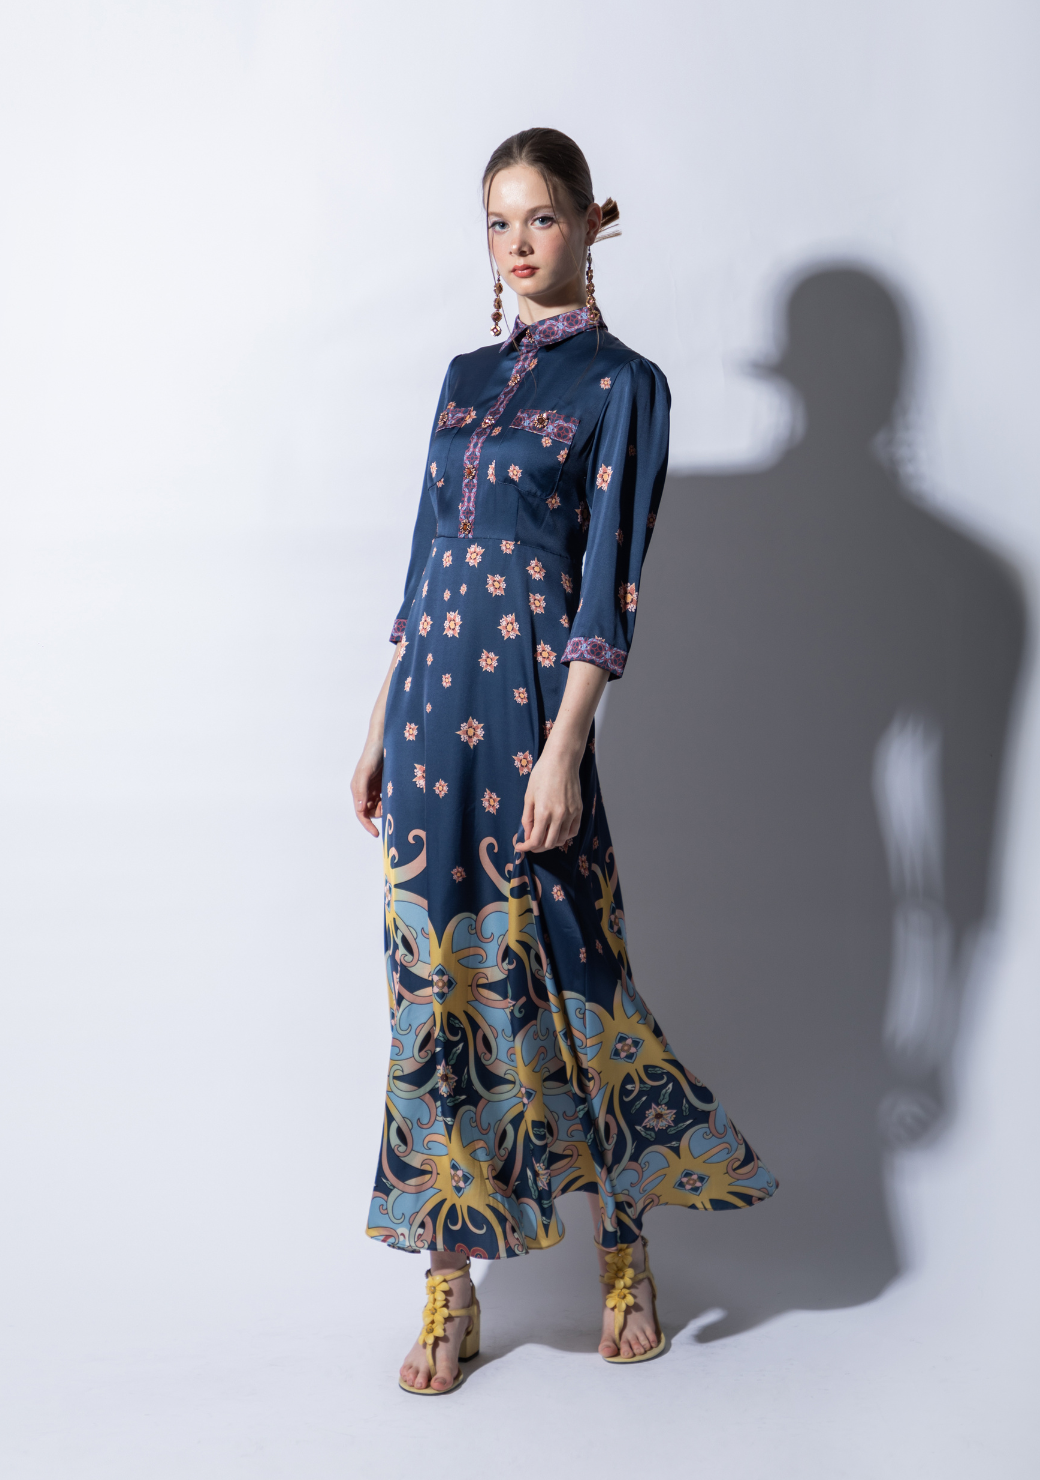 Tulur Pocketed Dress in Navy